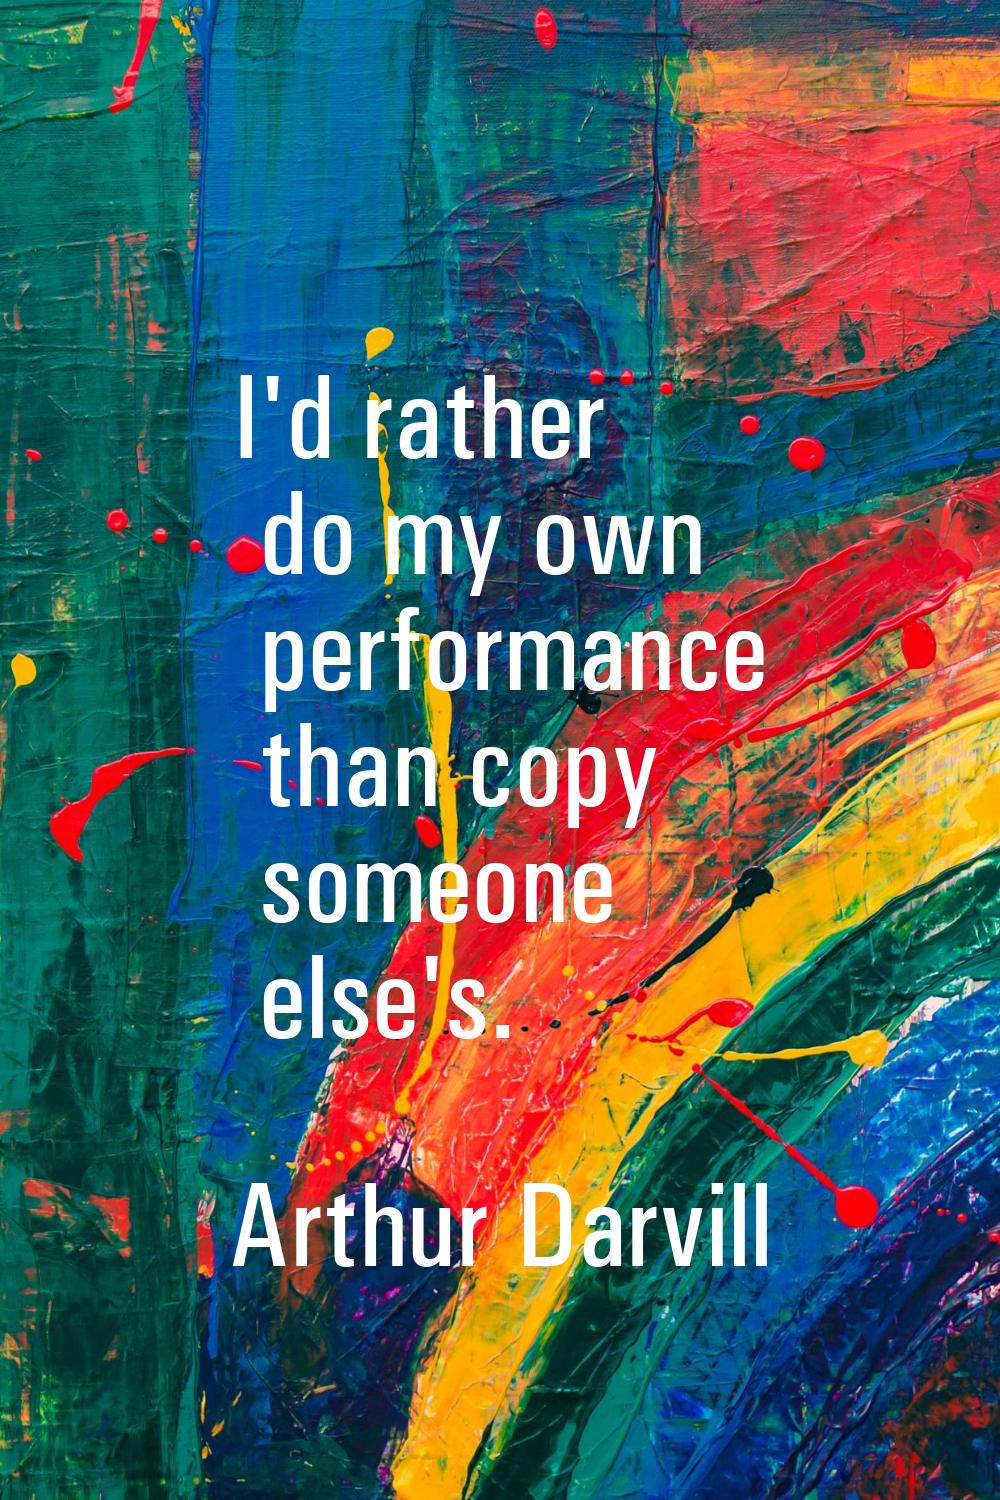 I'd rather do my own performance than copy someone else's.